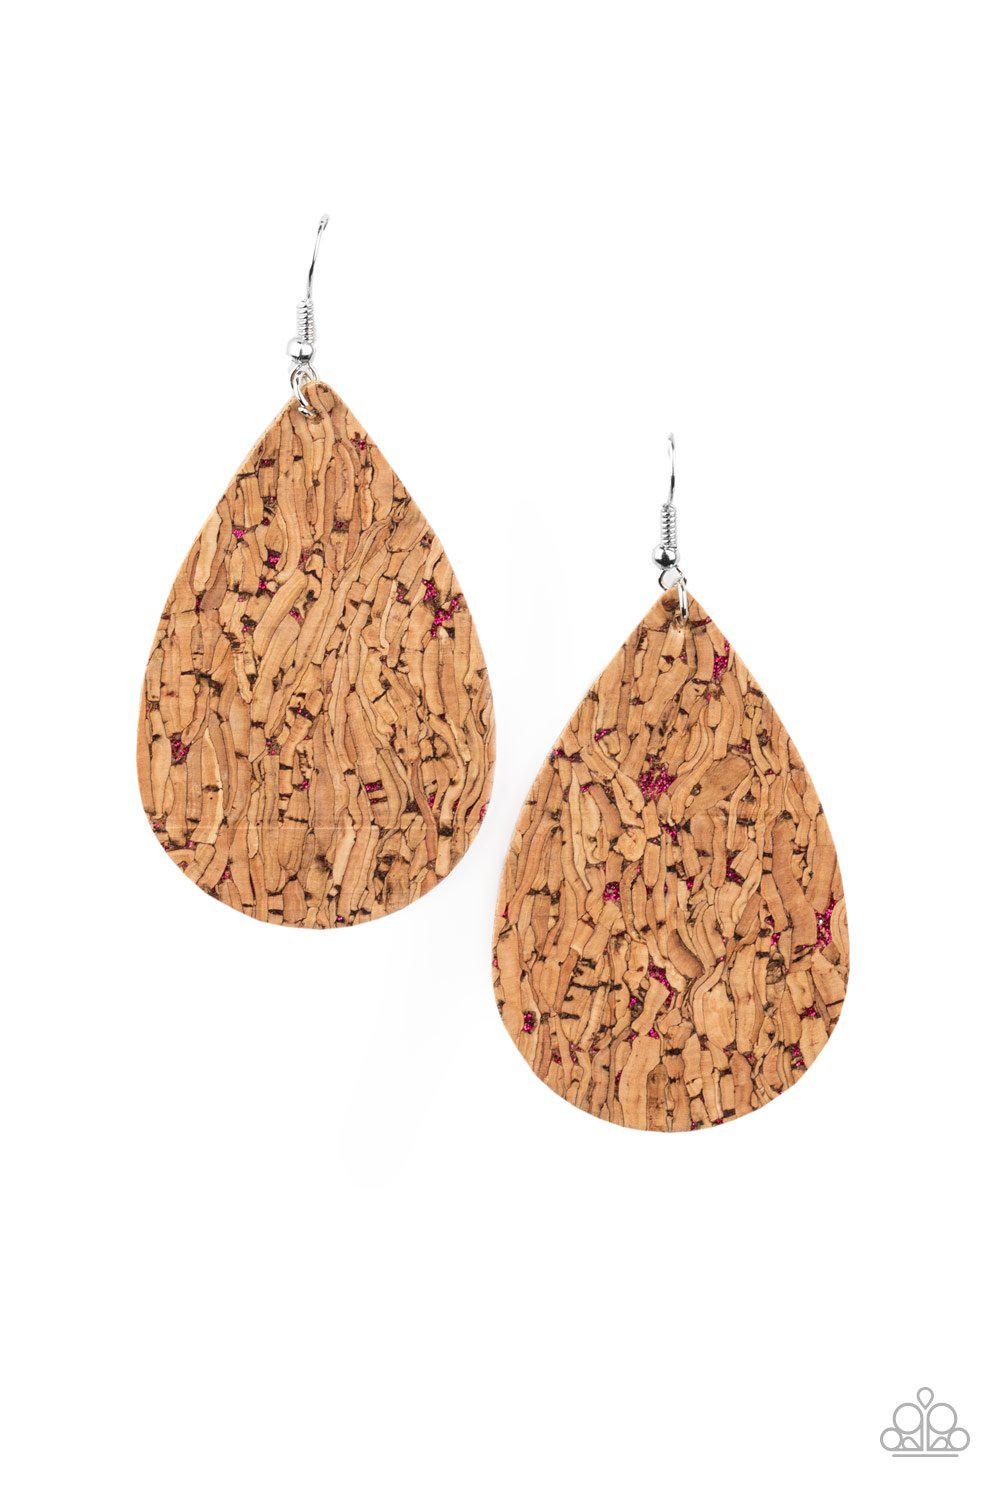 CORK It Over Pink and Cork Teardrop Earrings - Paparazzi Accessories-CarasShop.com - $5 Jewelry by Cara Jewels